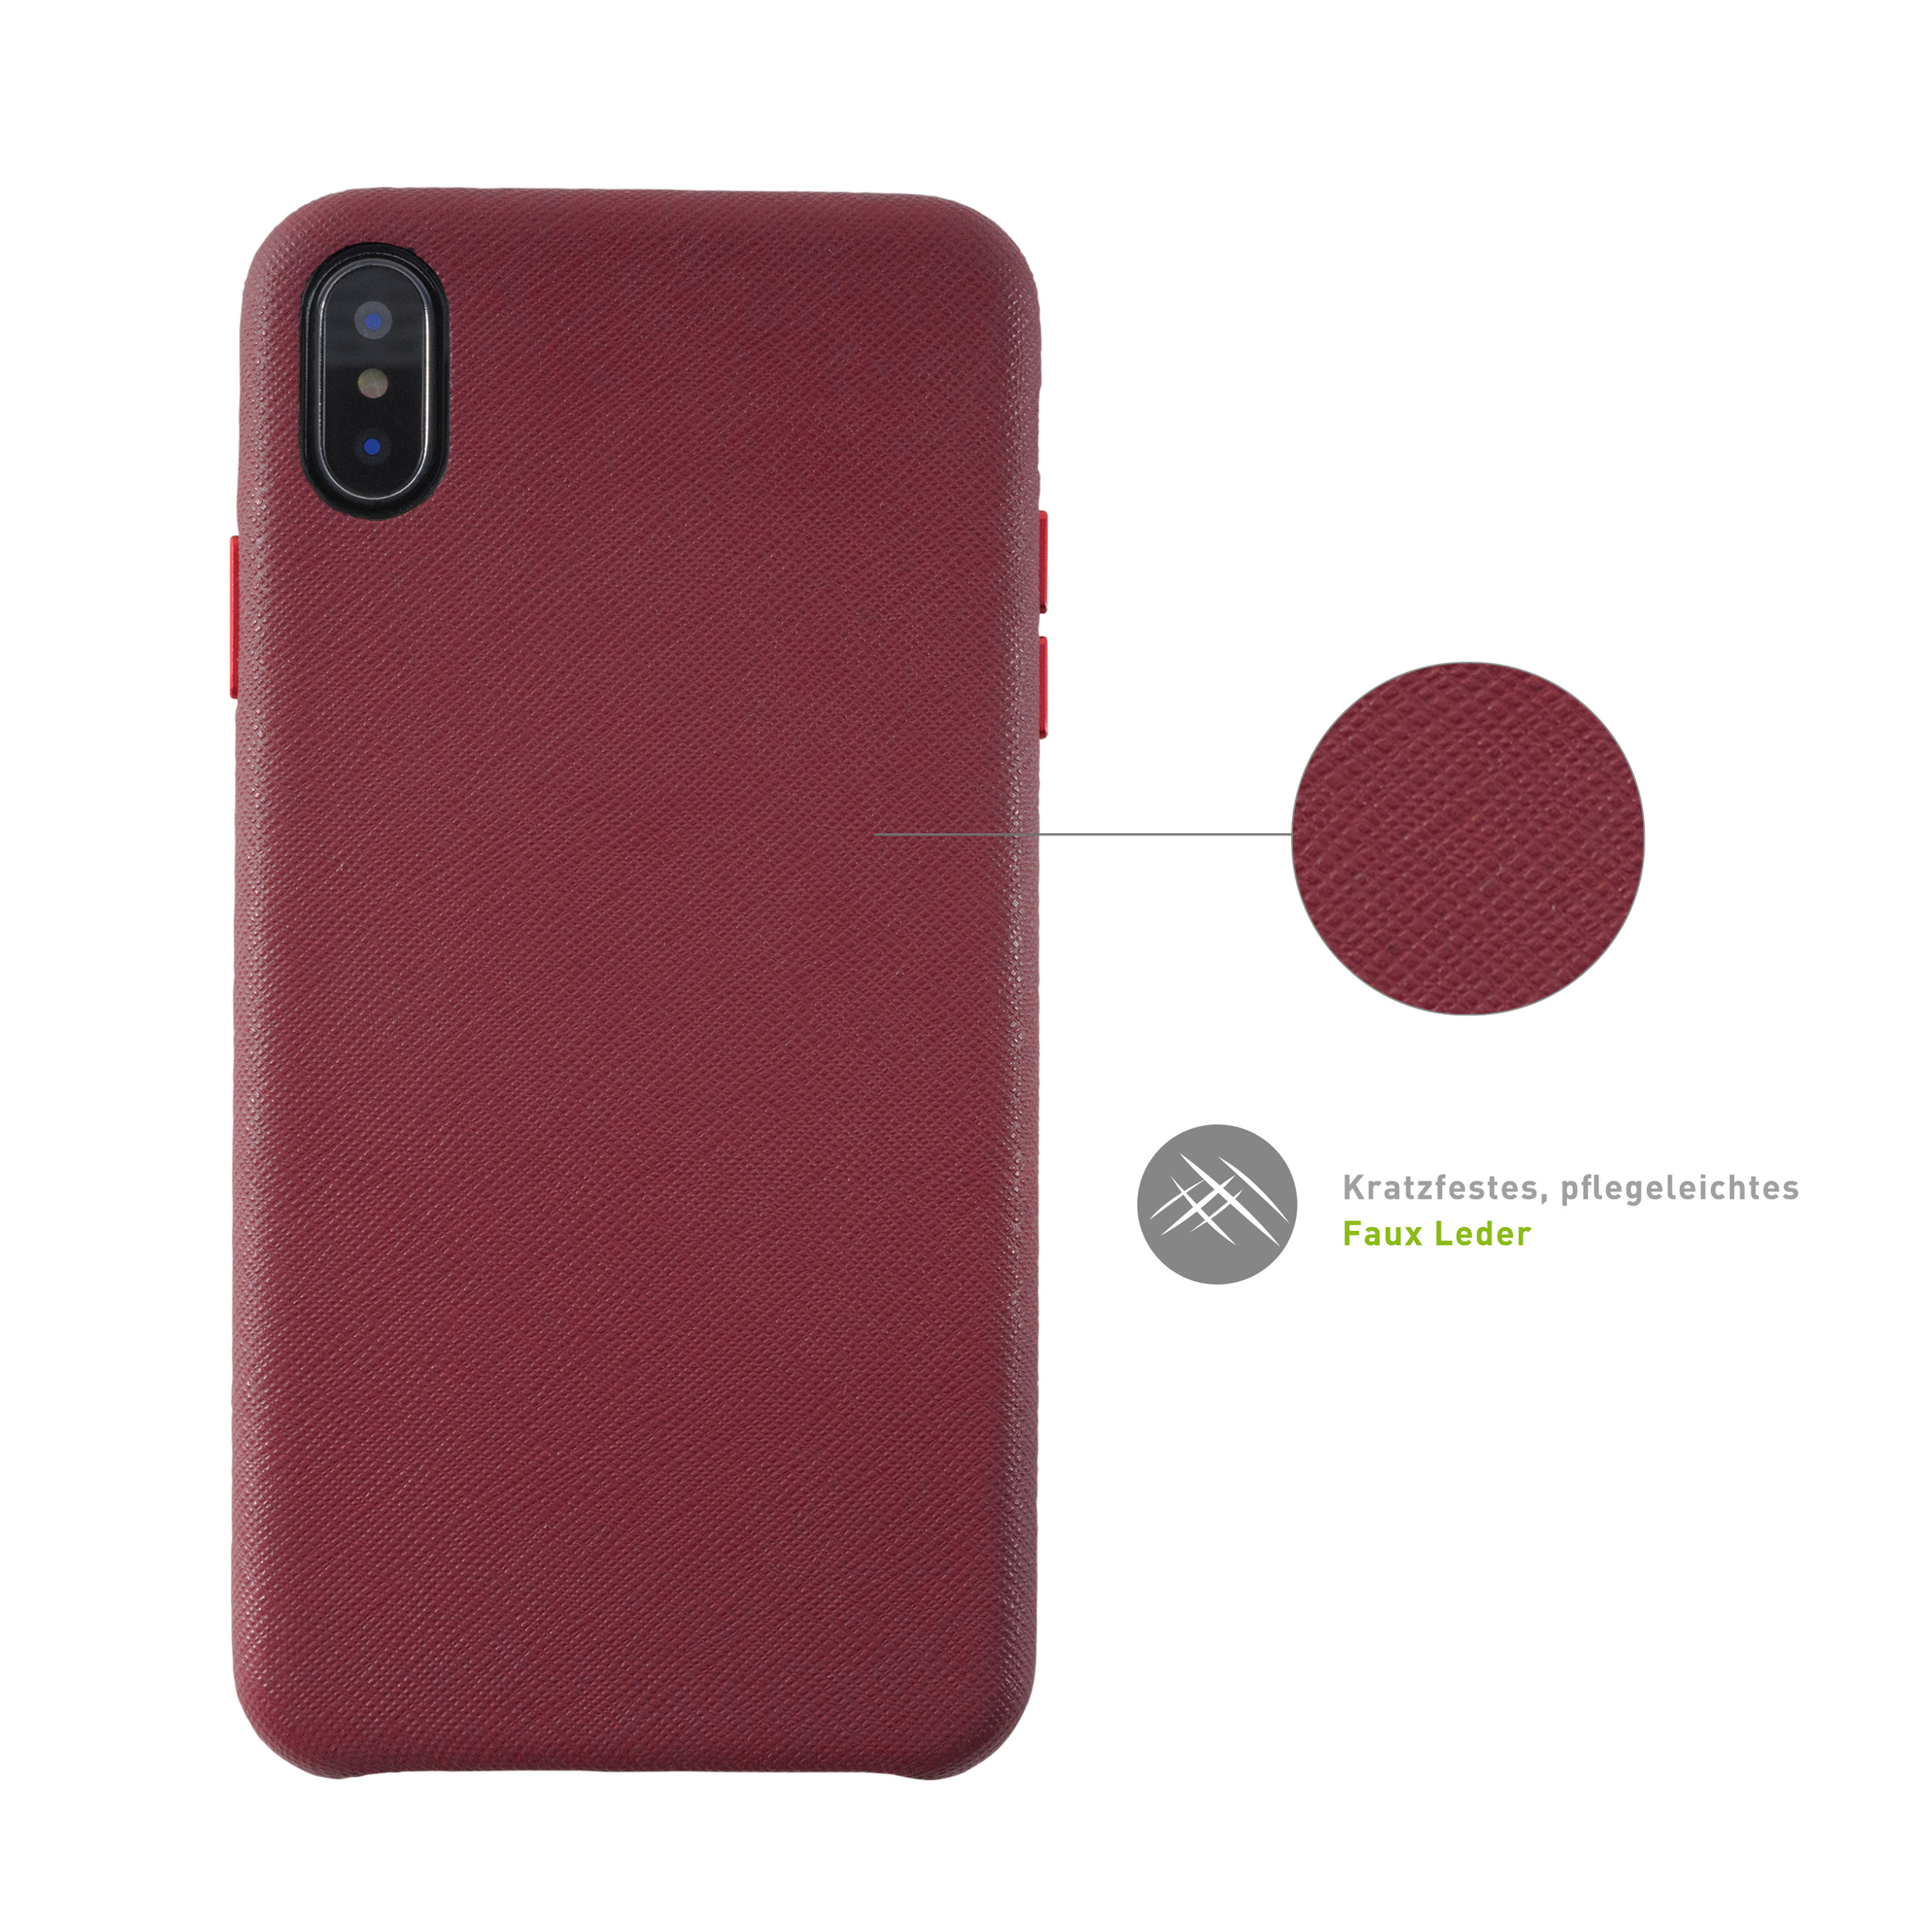 X Backcover, XS, Pear Apple, KMP Leder IPhone Schutzhülle Red, für XS, iPhone Vegane red X, pear